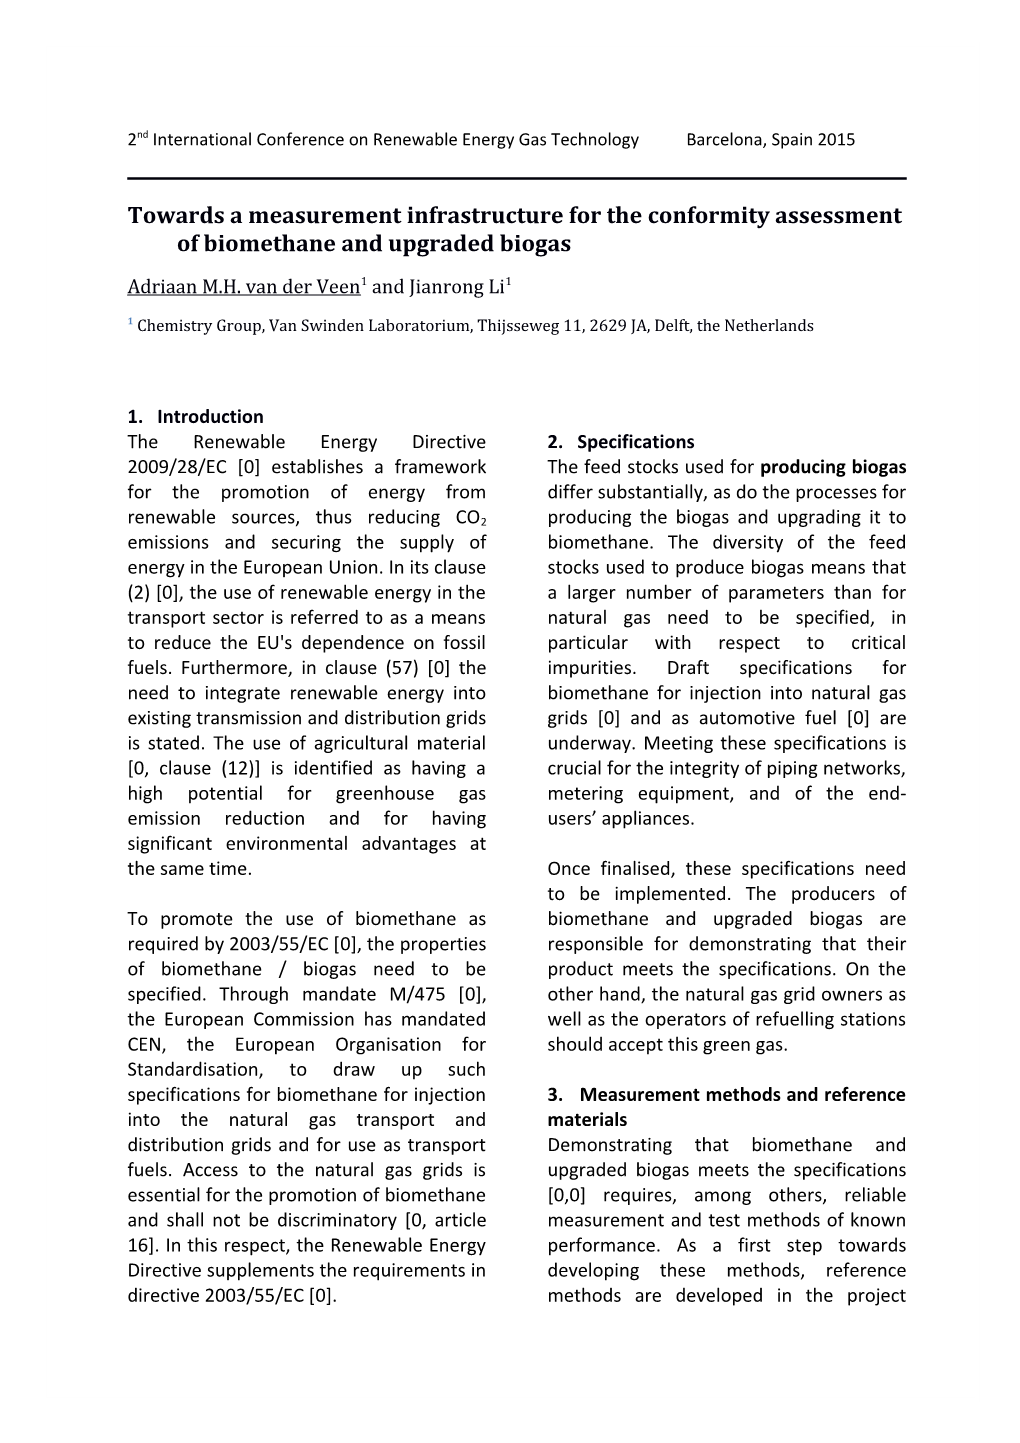 Towards a Measurement Infrastructure for the Conformity Assessment of Biomethane and Upgraded